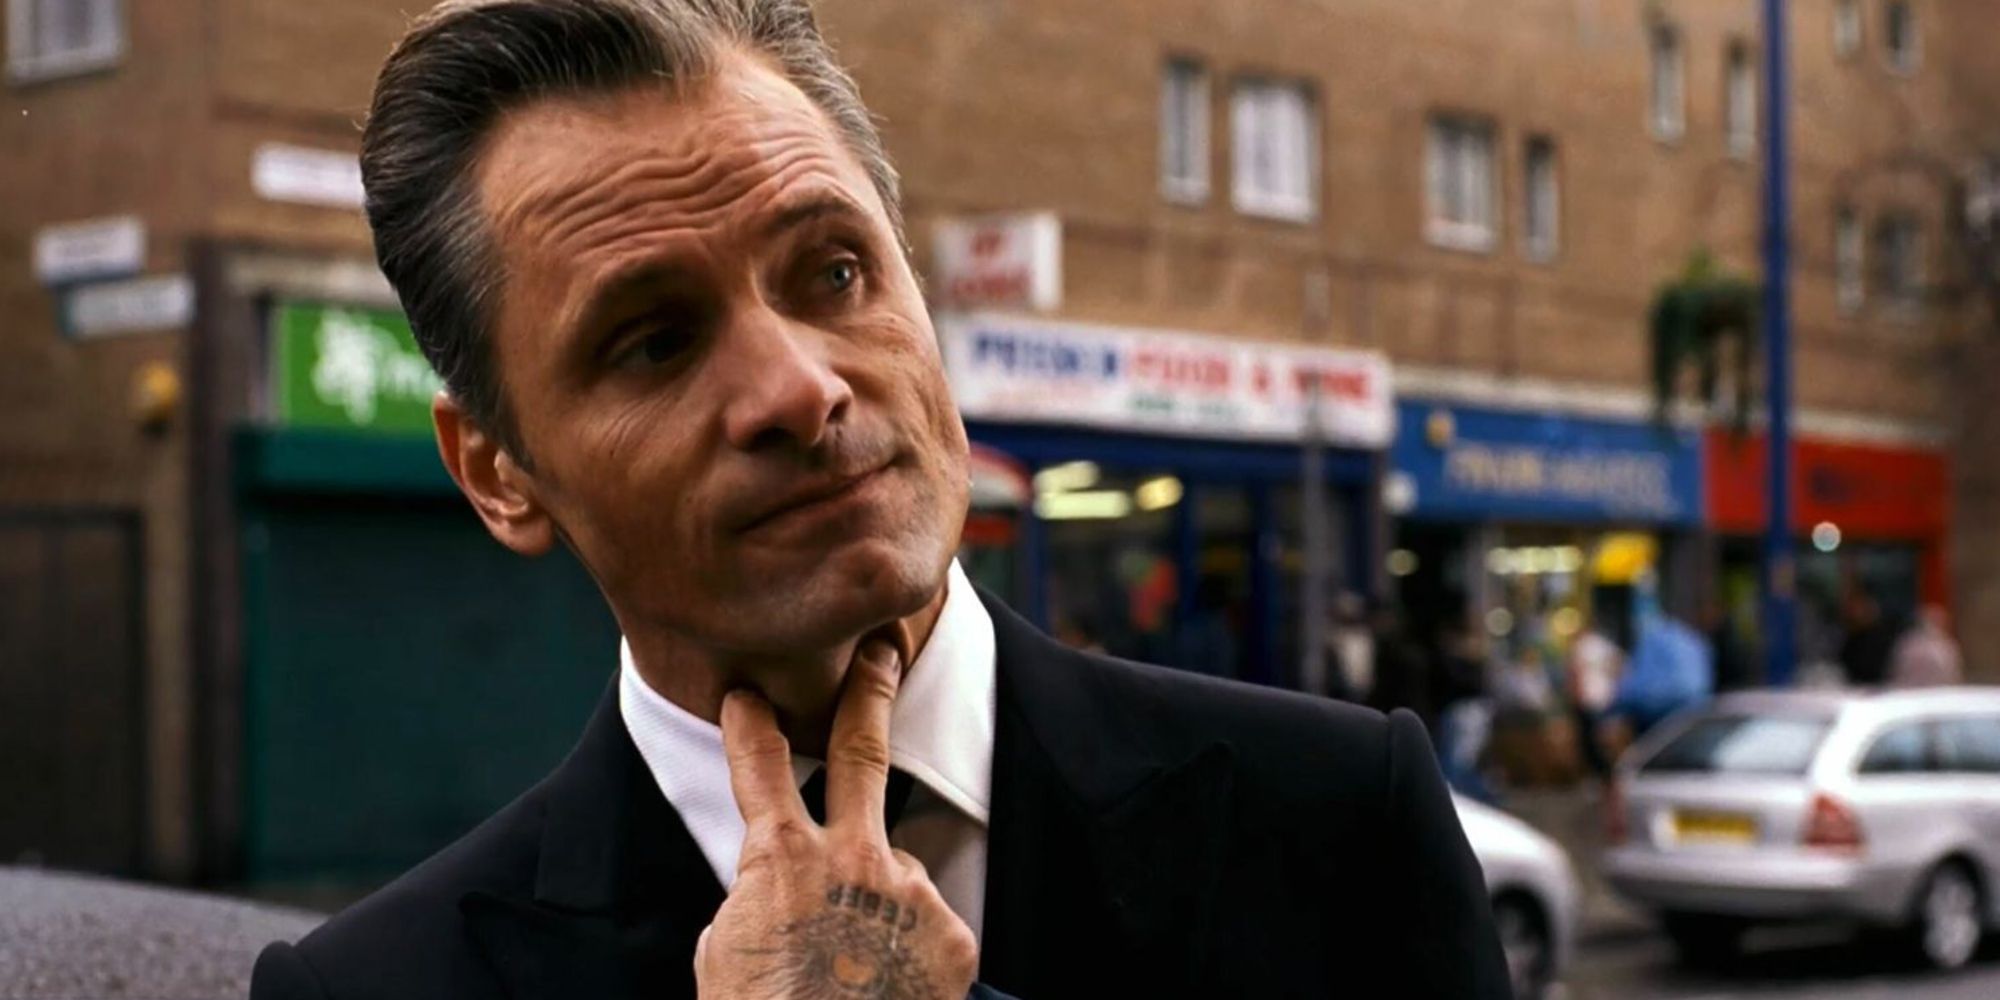 Eastern Promises is a slow-boil of dramatic tension